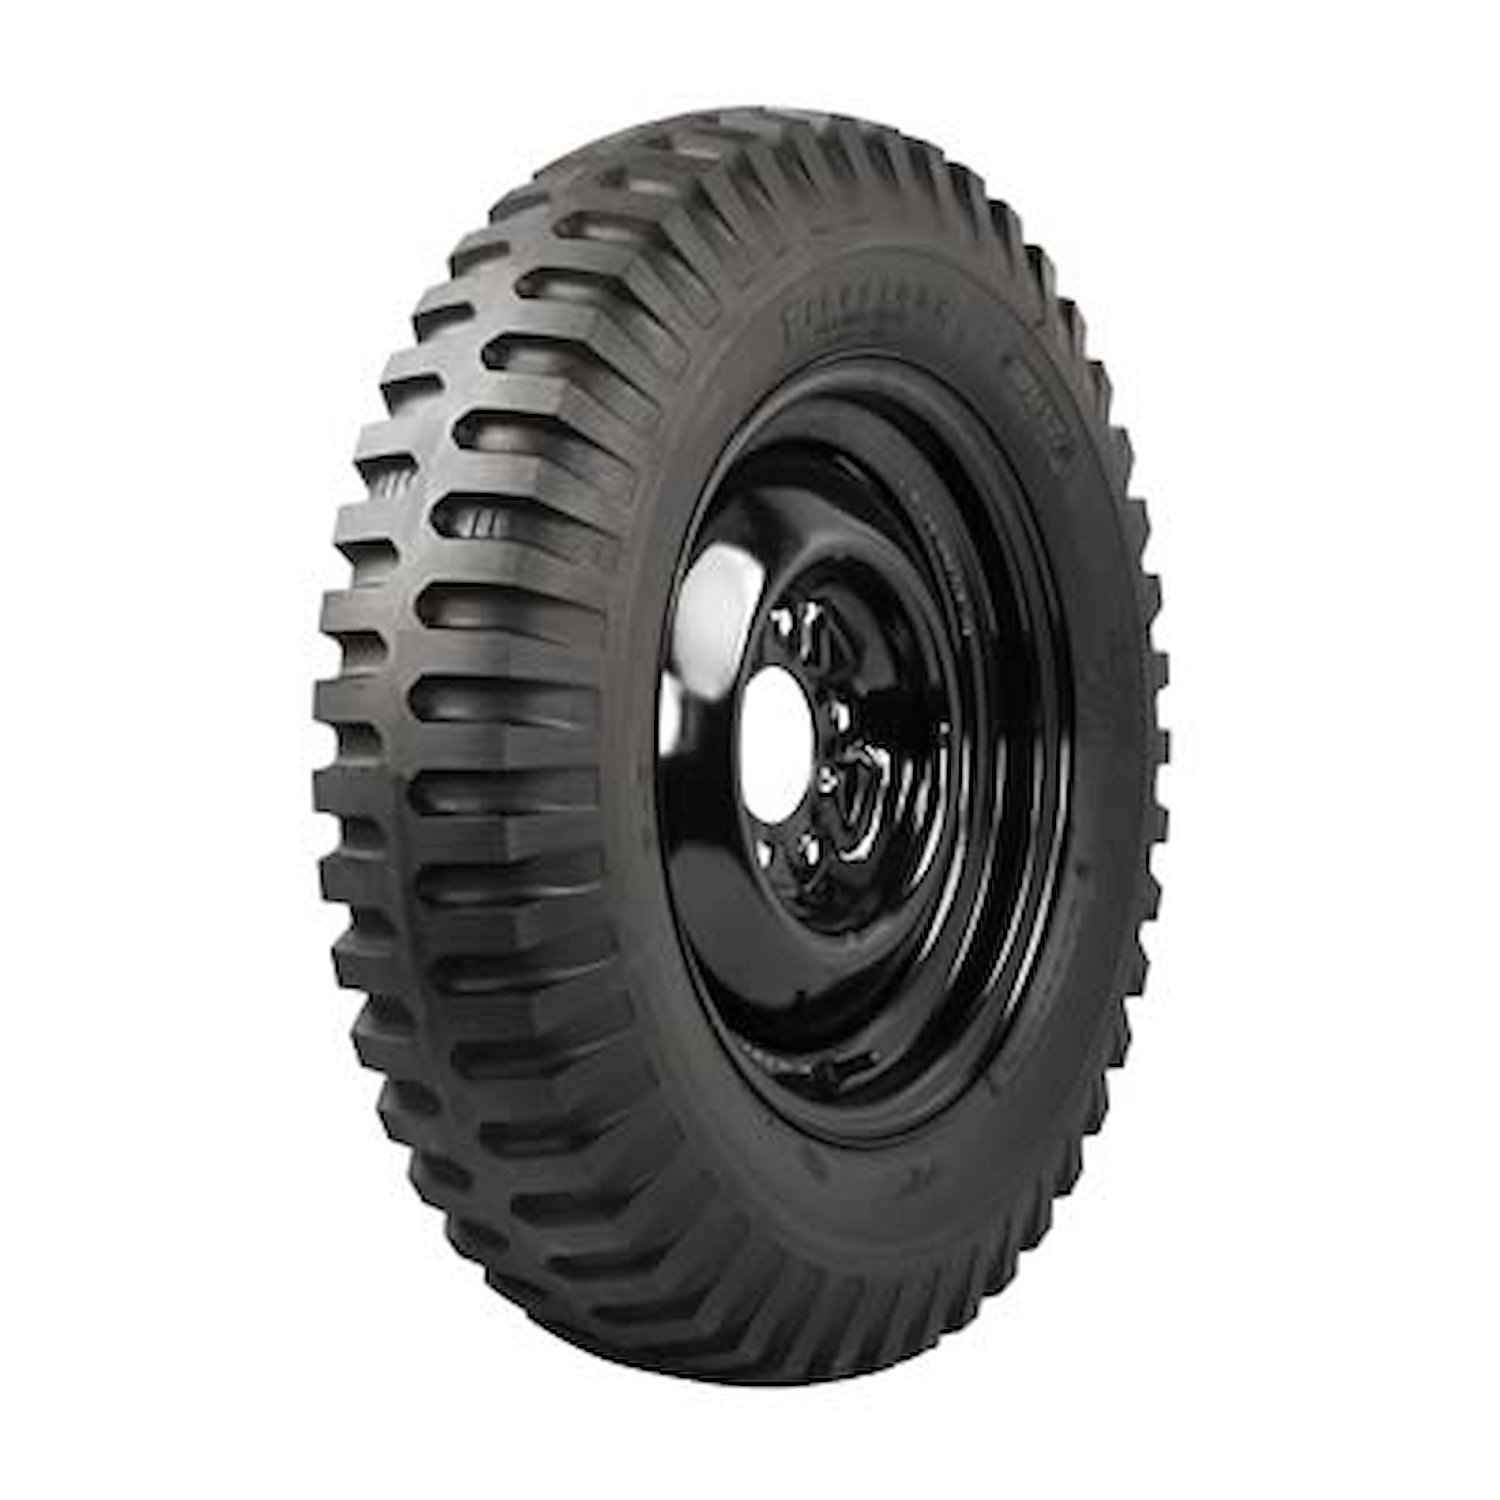 775030 Tire, Military, NDT, 12-Ply, 900-20